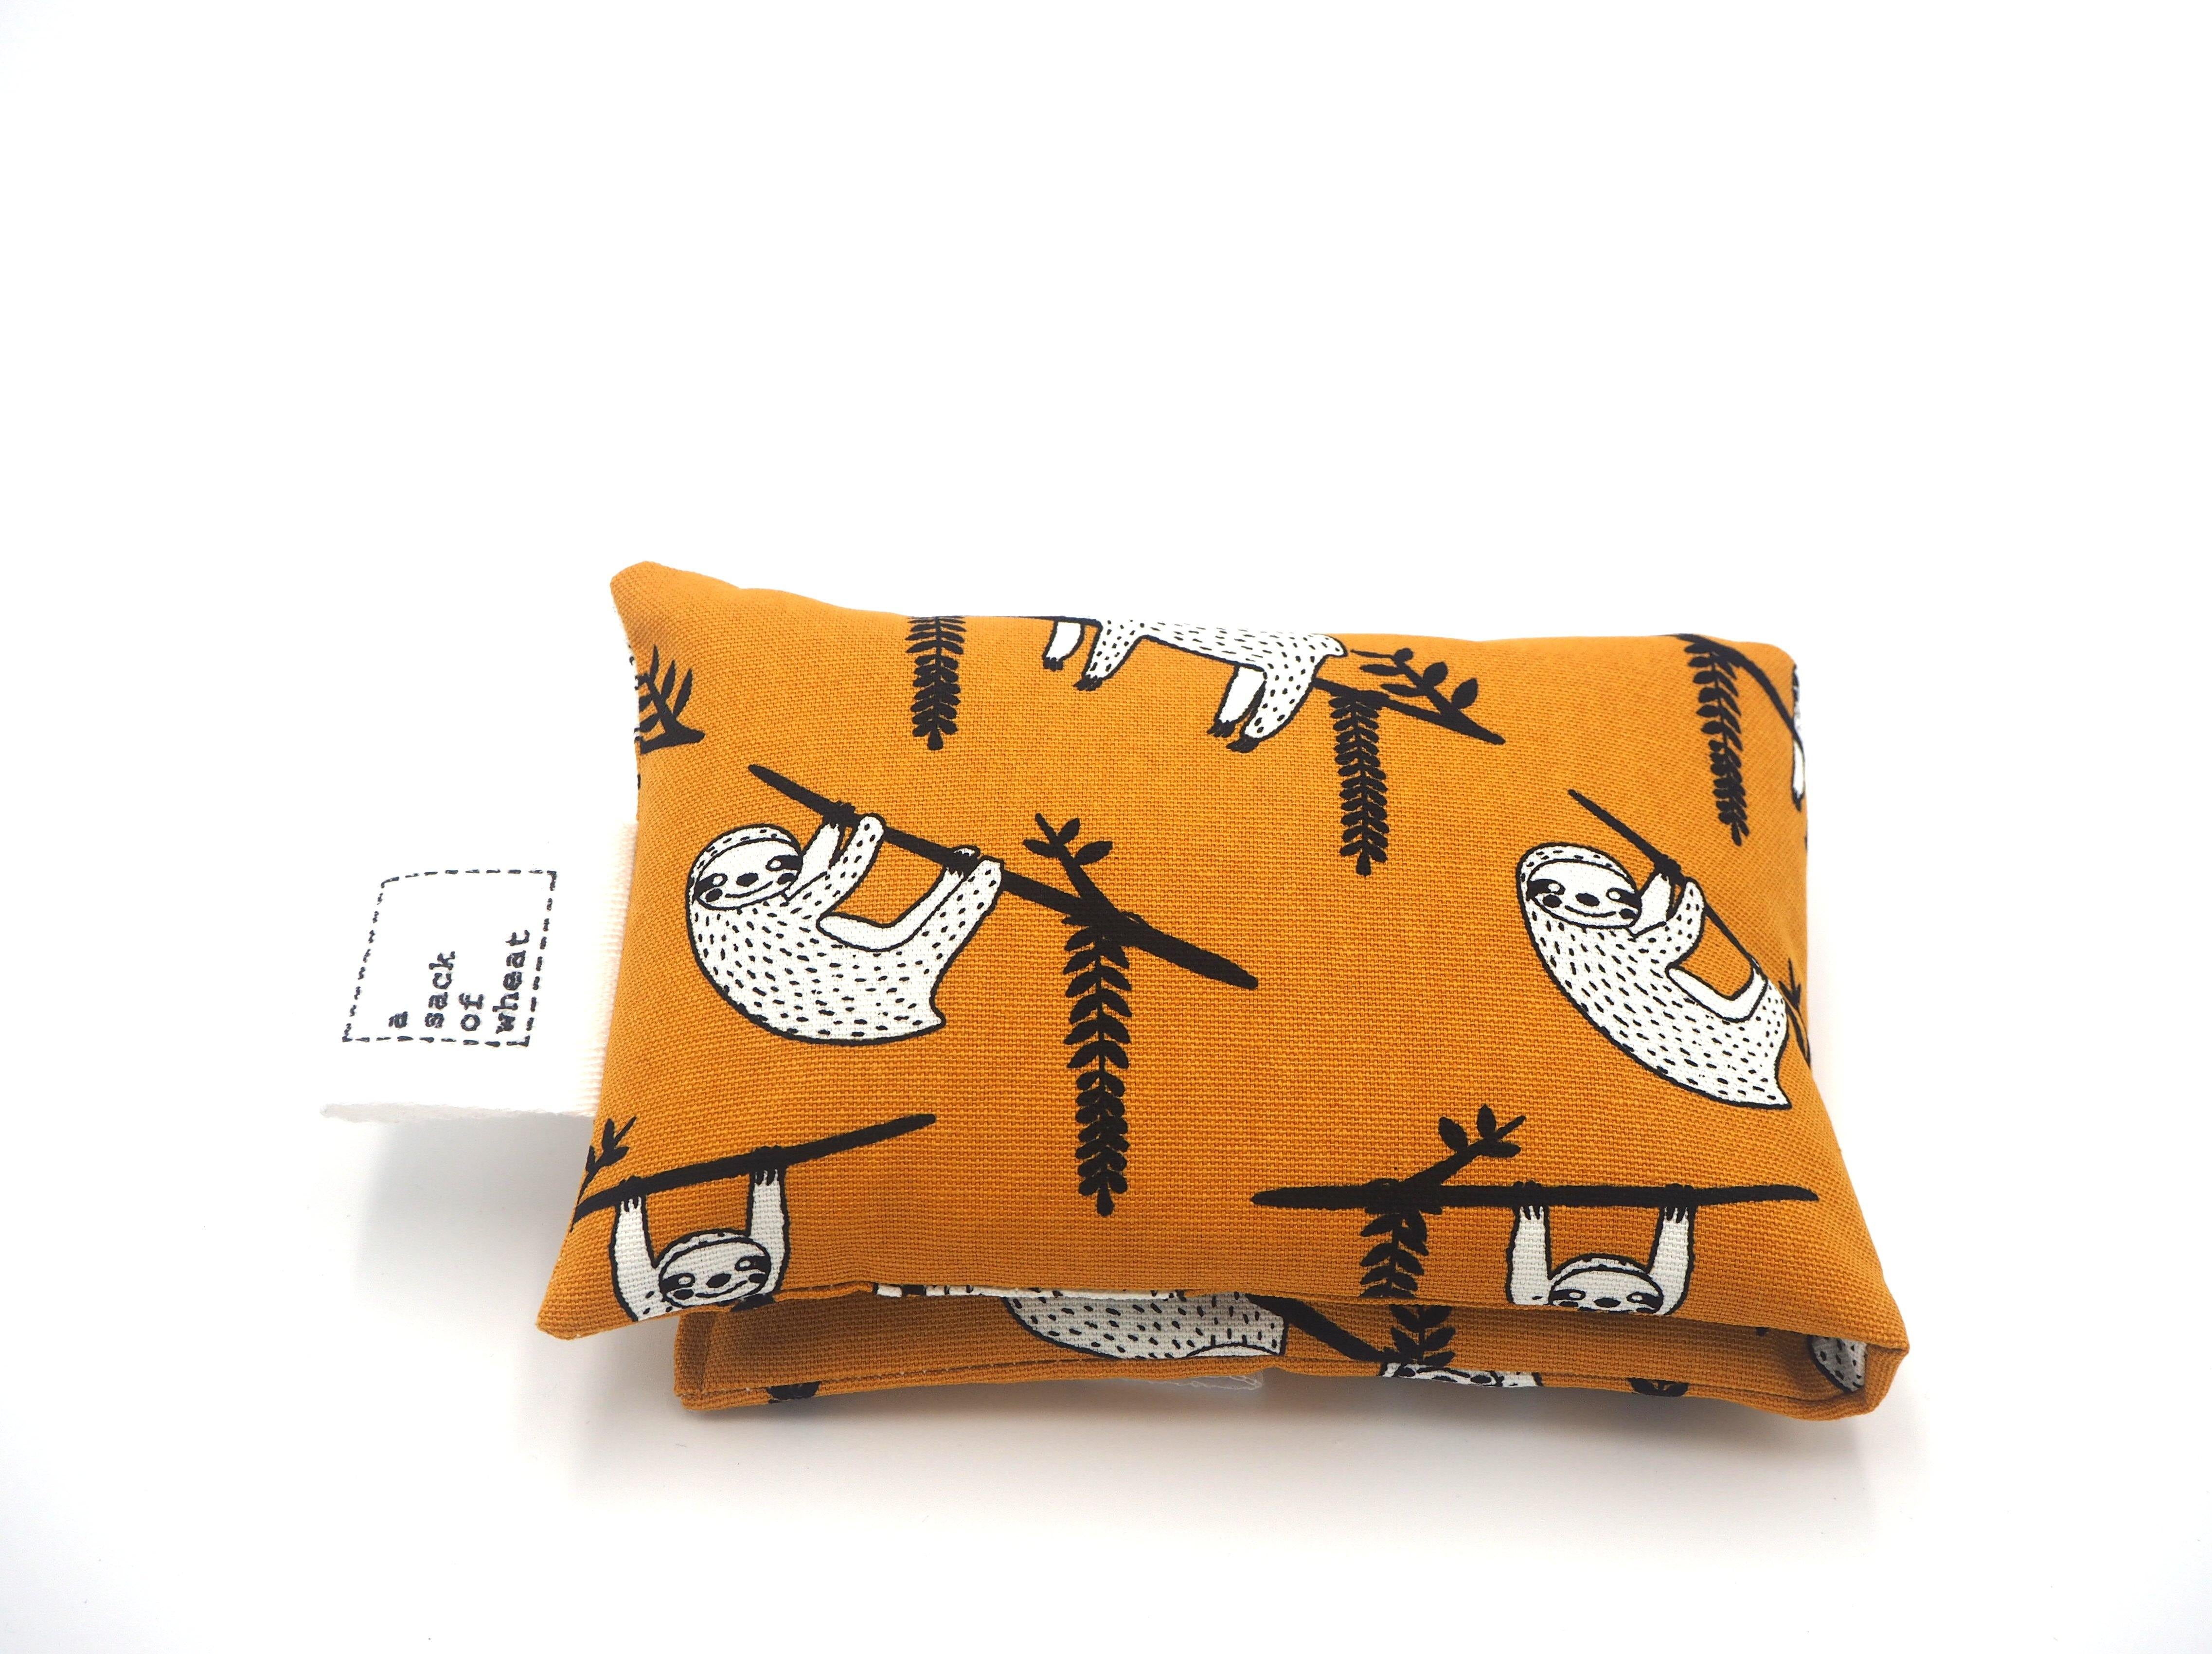 Folded view of A Sack Of Wheat, featuring Hanging Around Sloth print, 100% cotton fabric